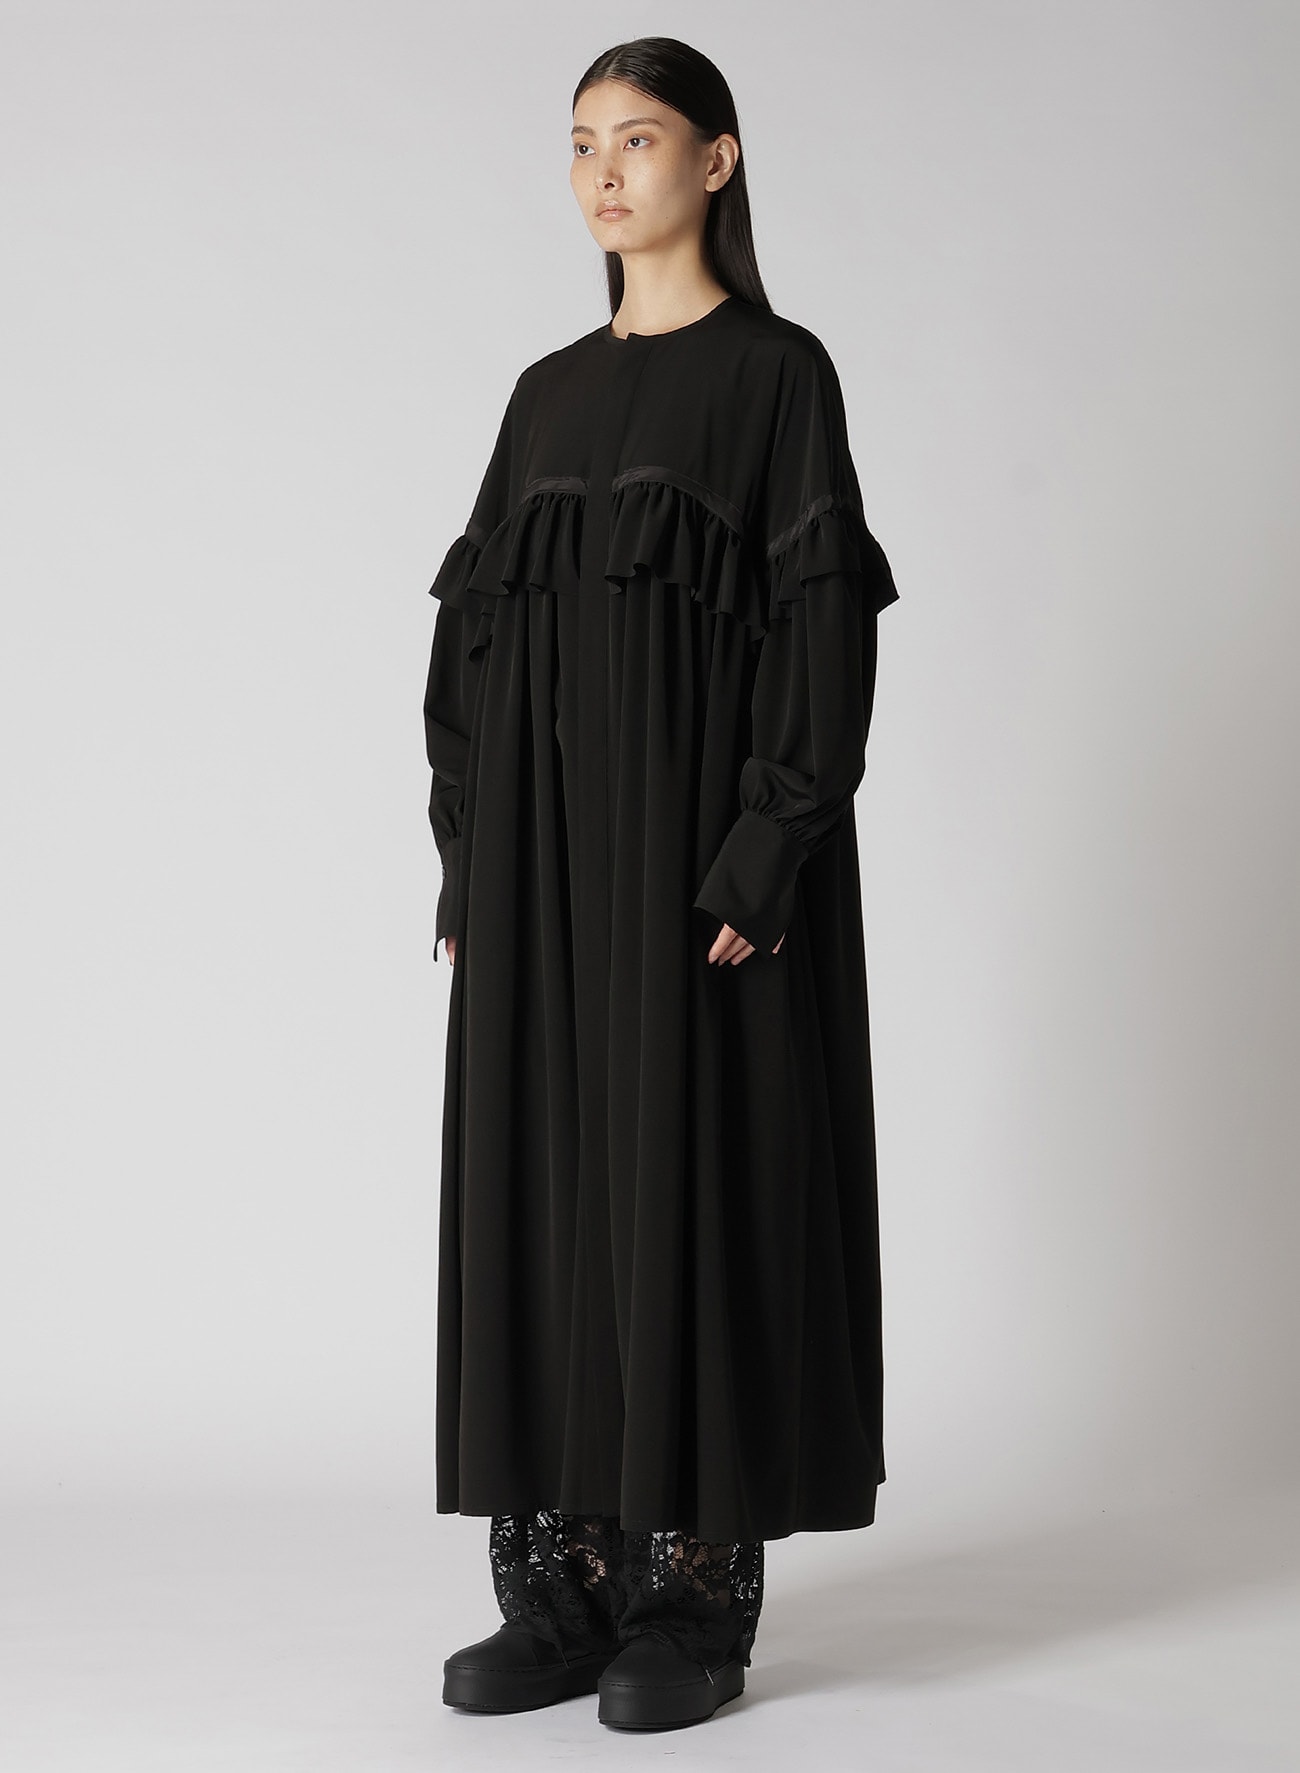 【8/7 12:00(JST) Release】TRIACETATE/POLYESTER RUFFLED DRESS